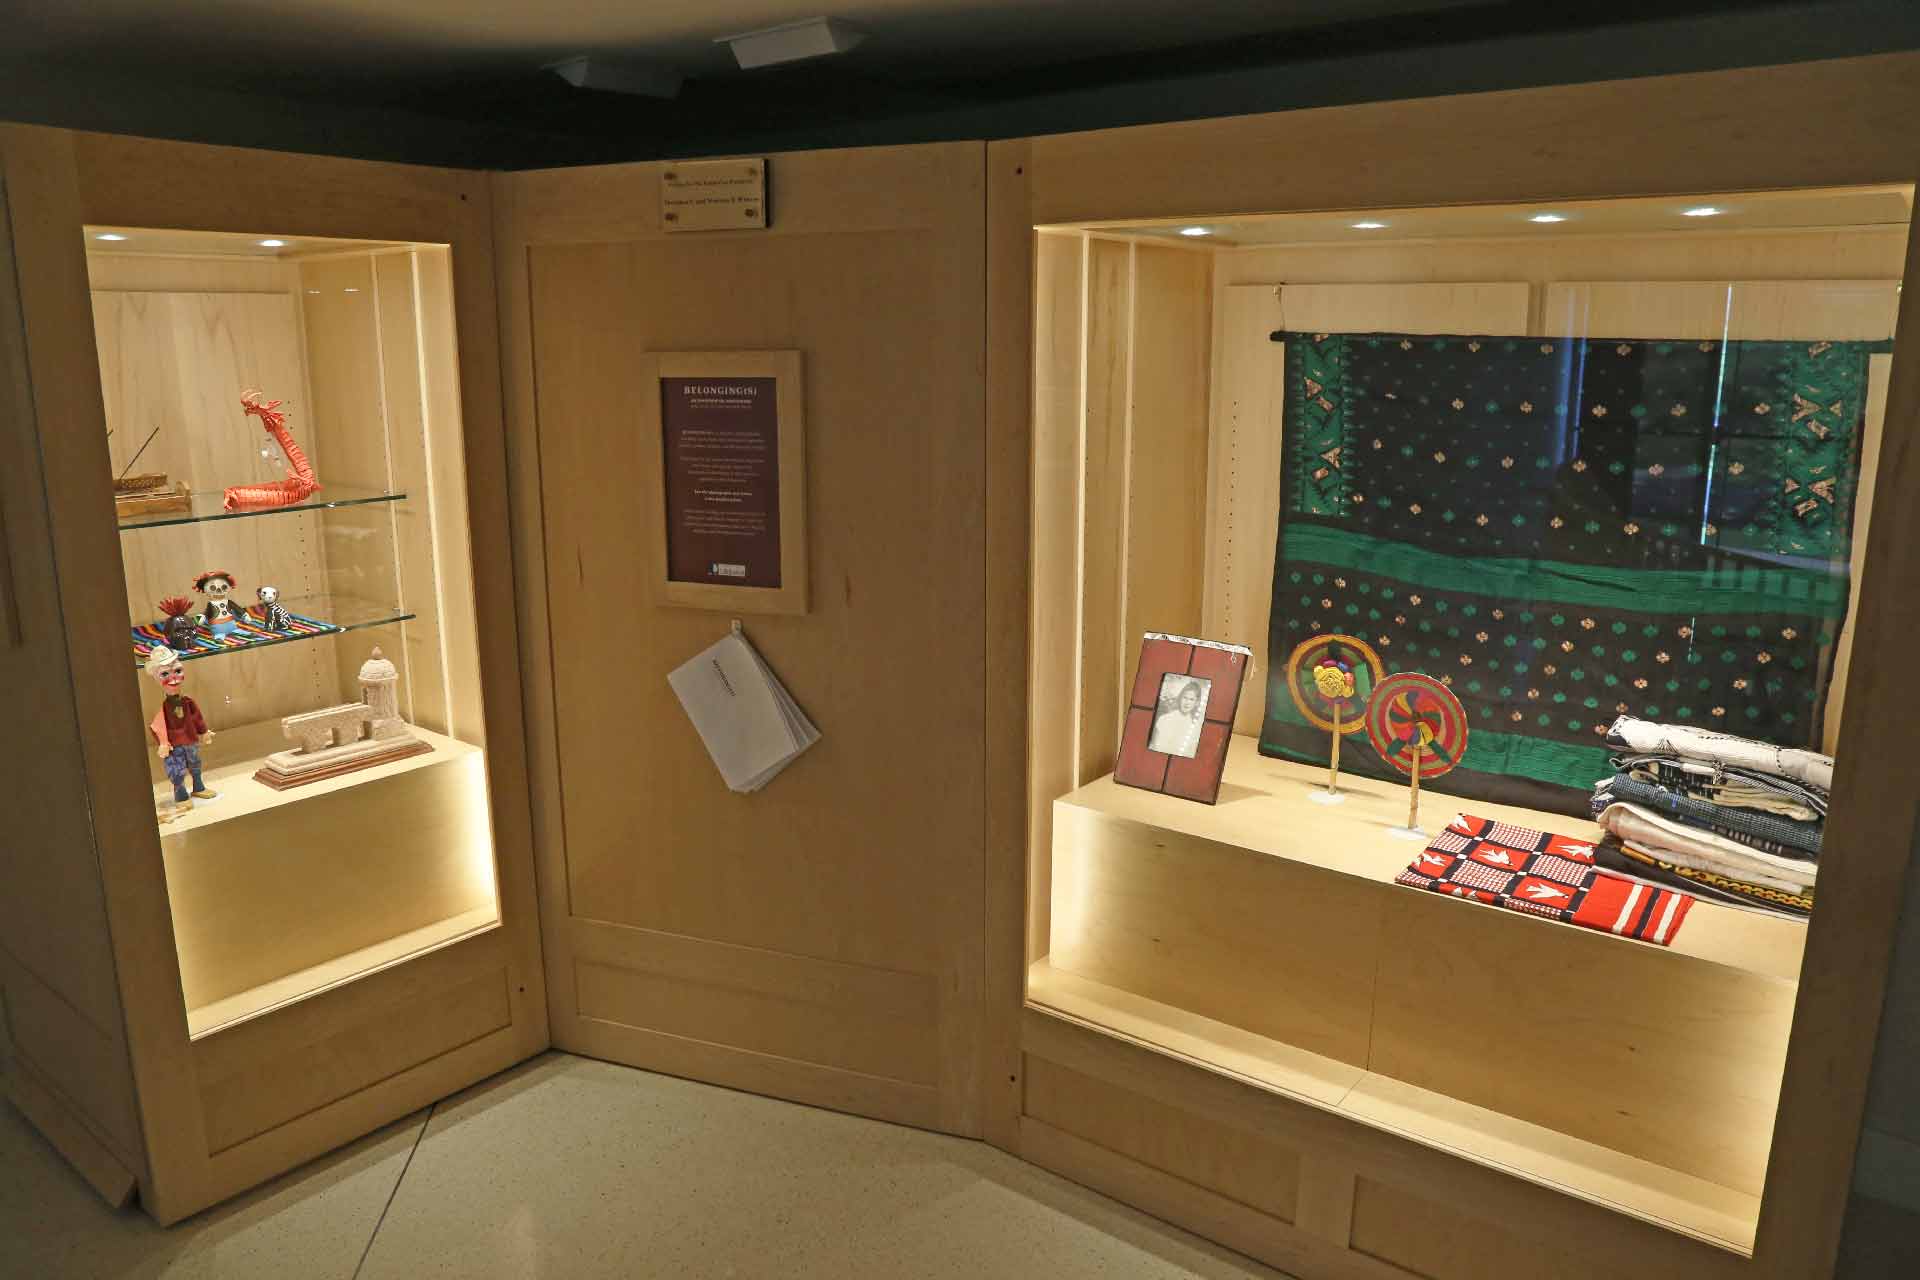 overview shot of the exhibit with the two display cases